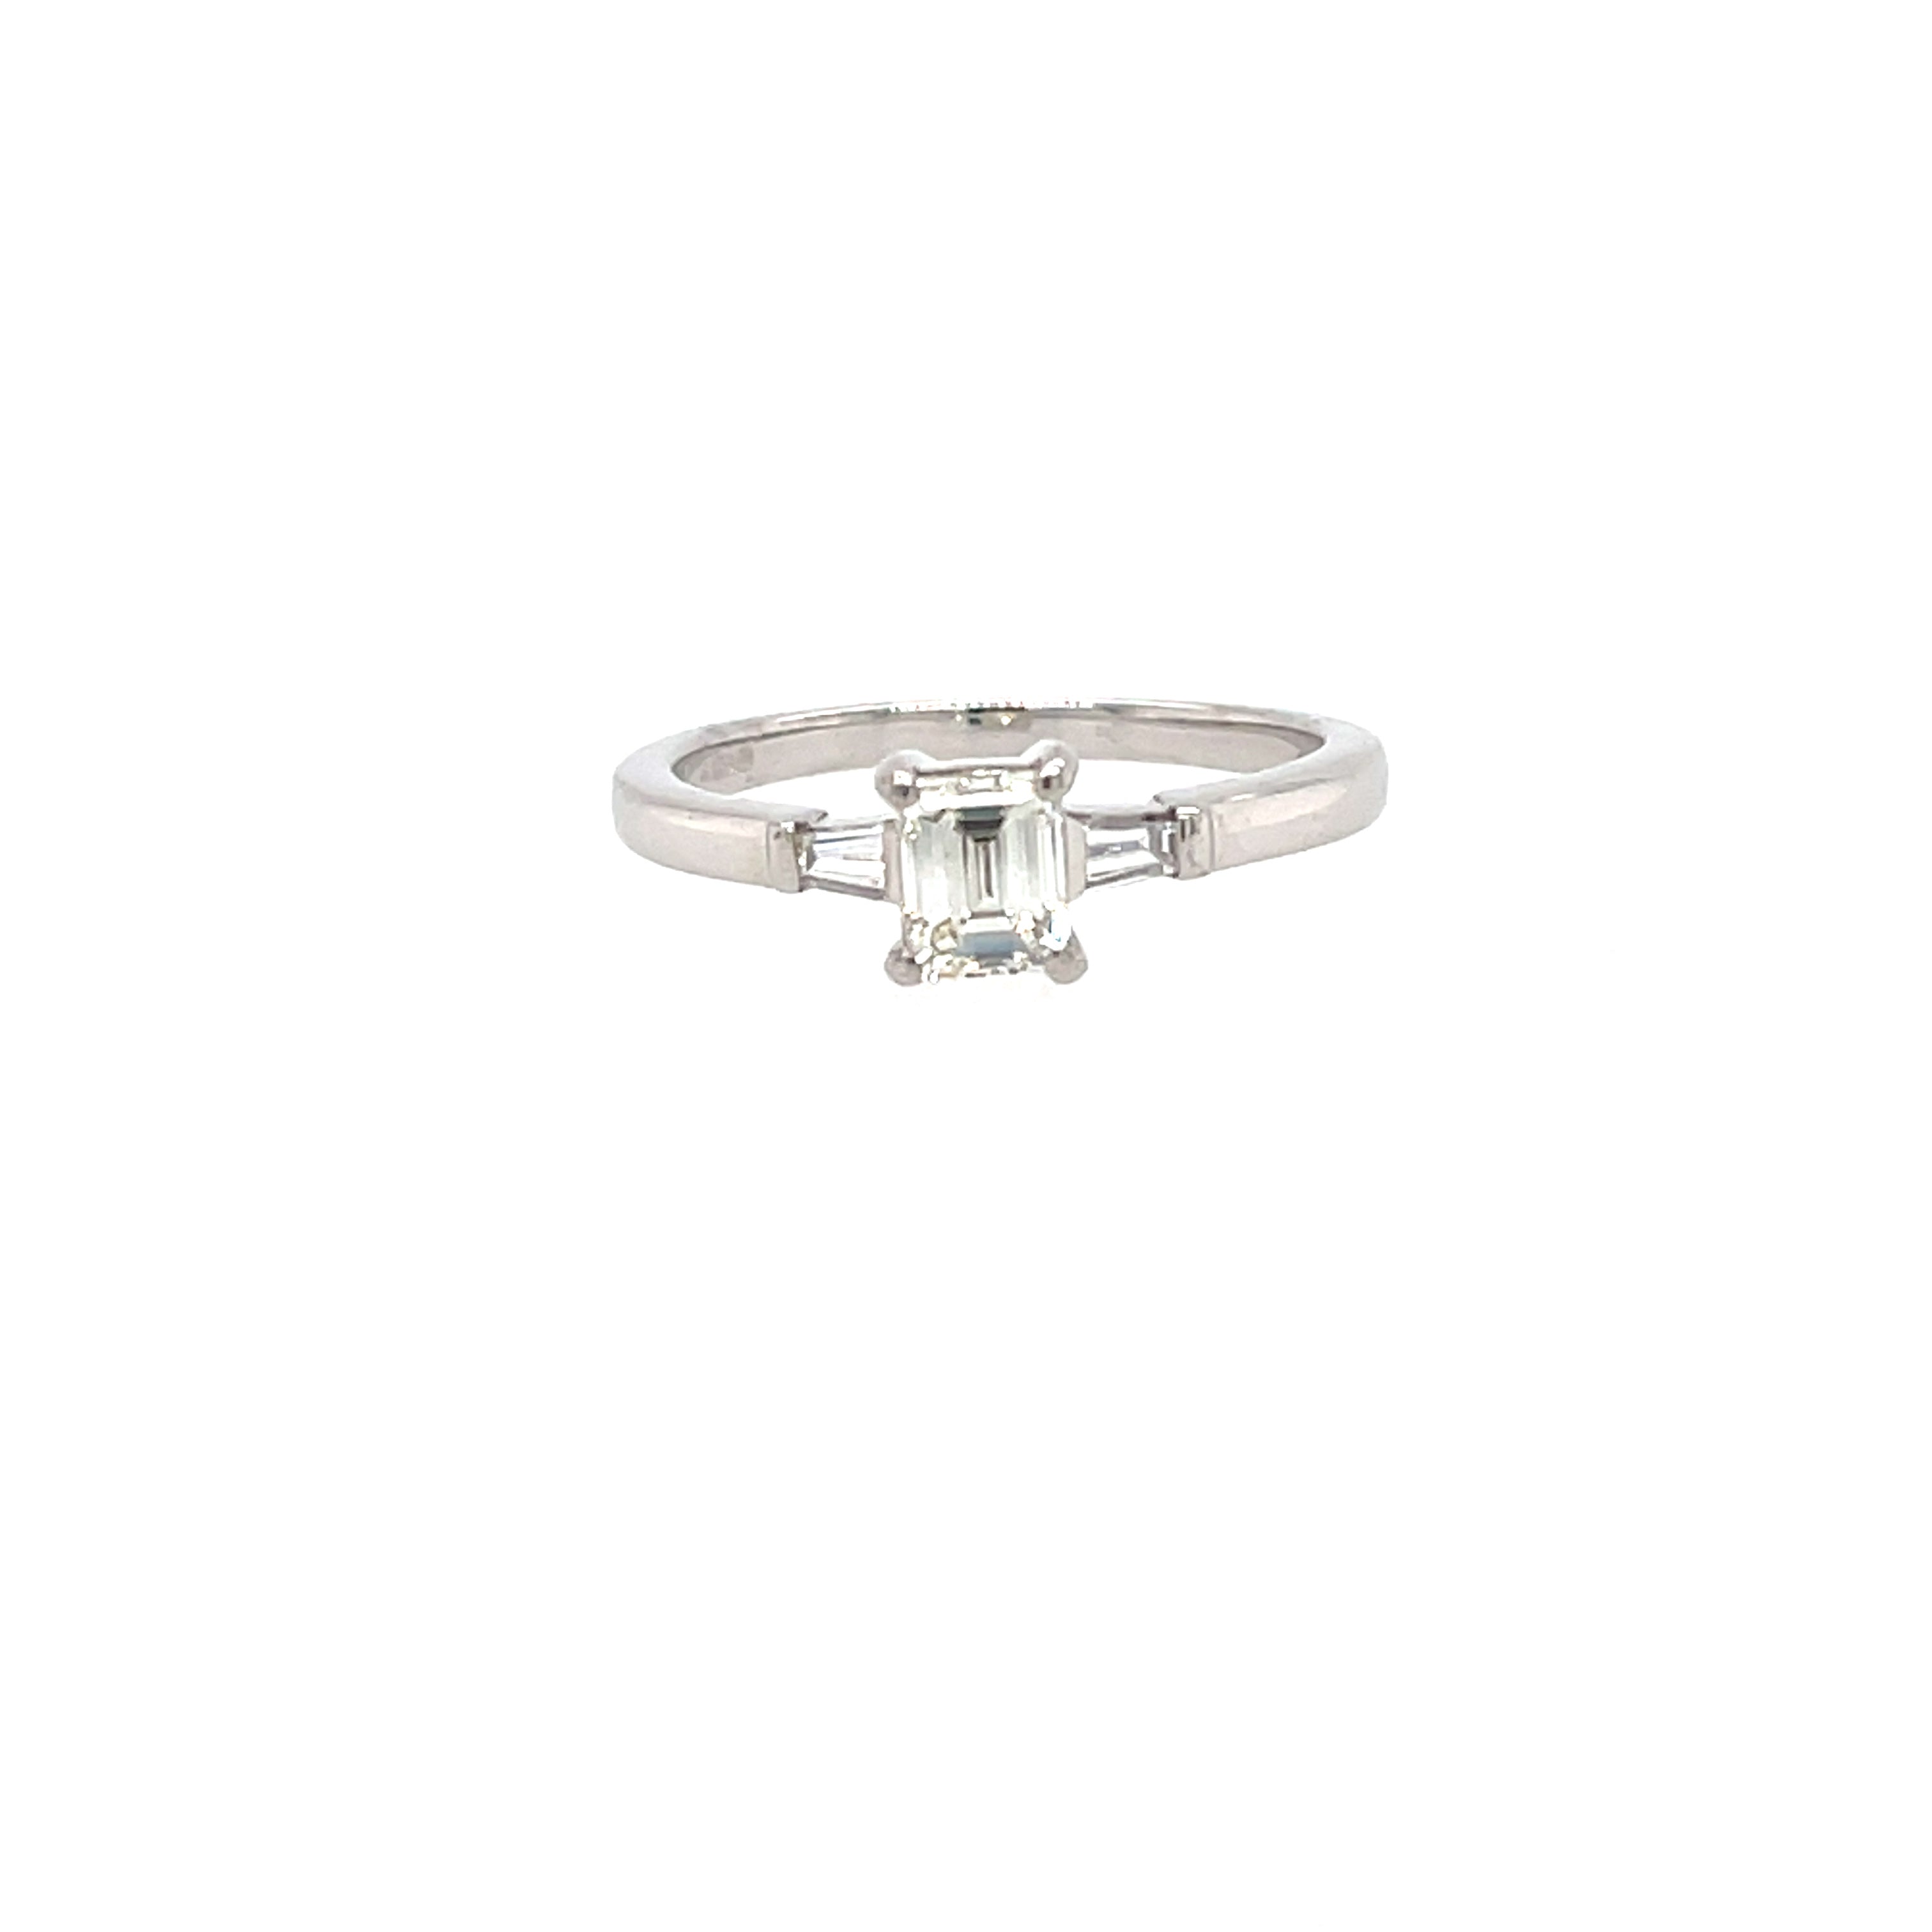 18ct White Gold 0.51ct Emerald Cut Diamond Solitaire Engagement Ring Certified K VVS